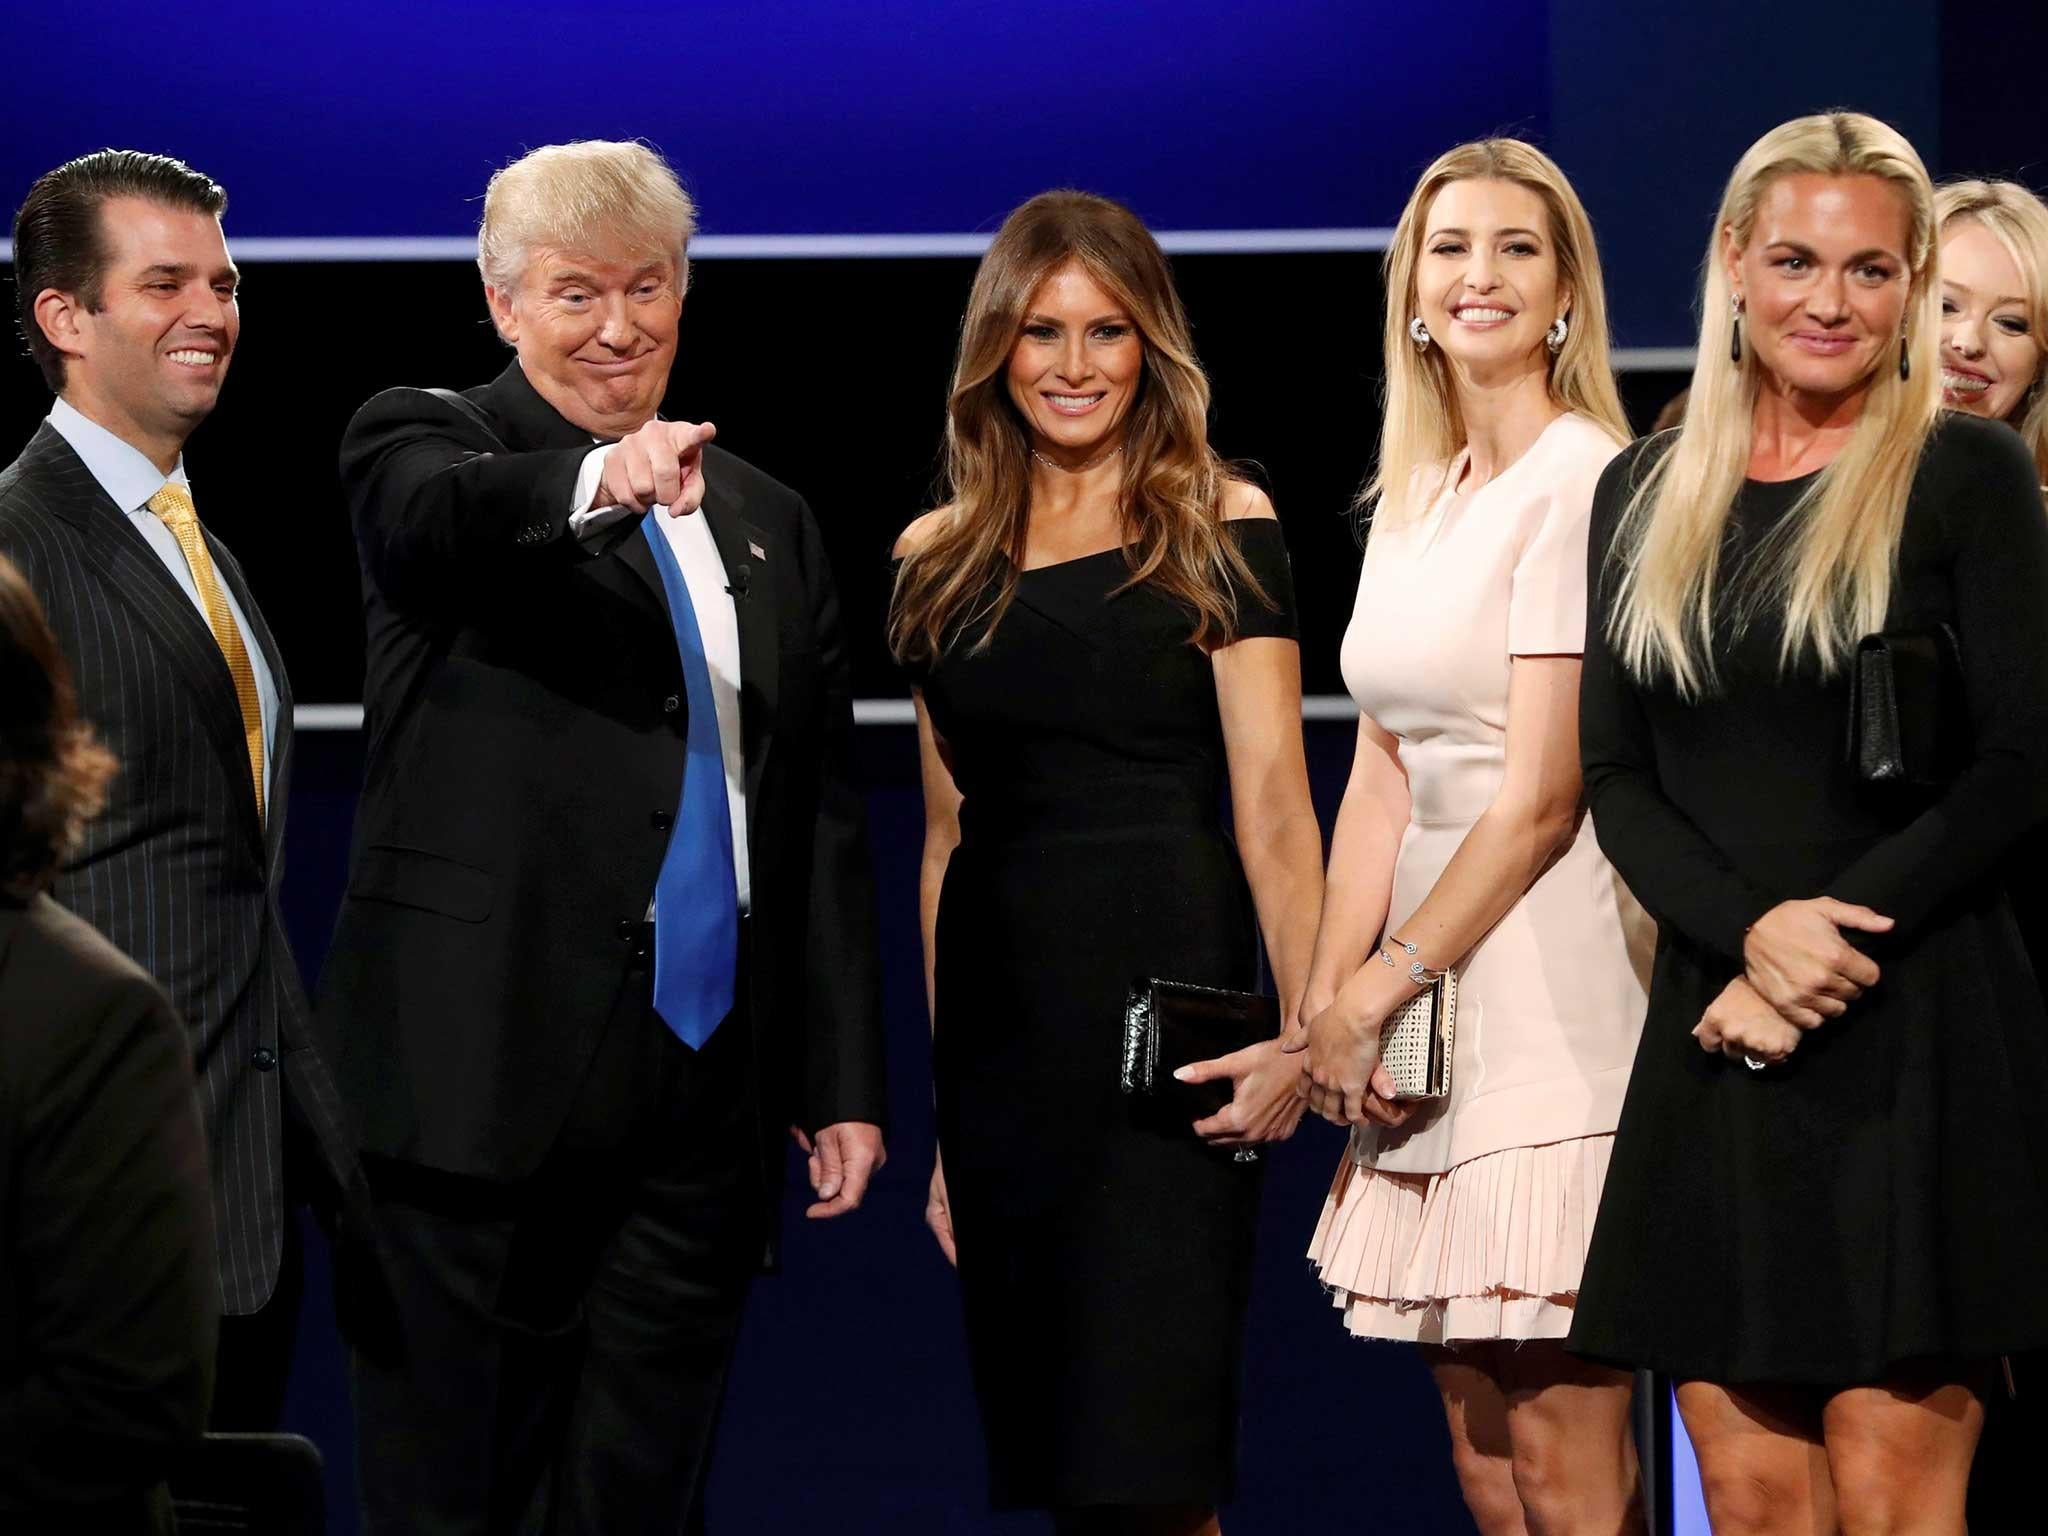 &#13;
Trump’s family congregated on the stage after the debate instead of greeting the crowd &#13;